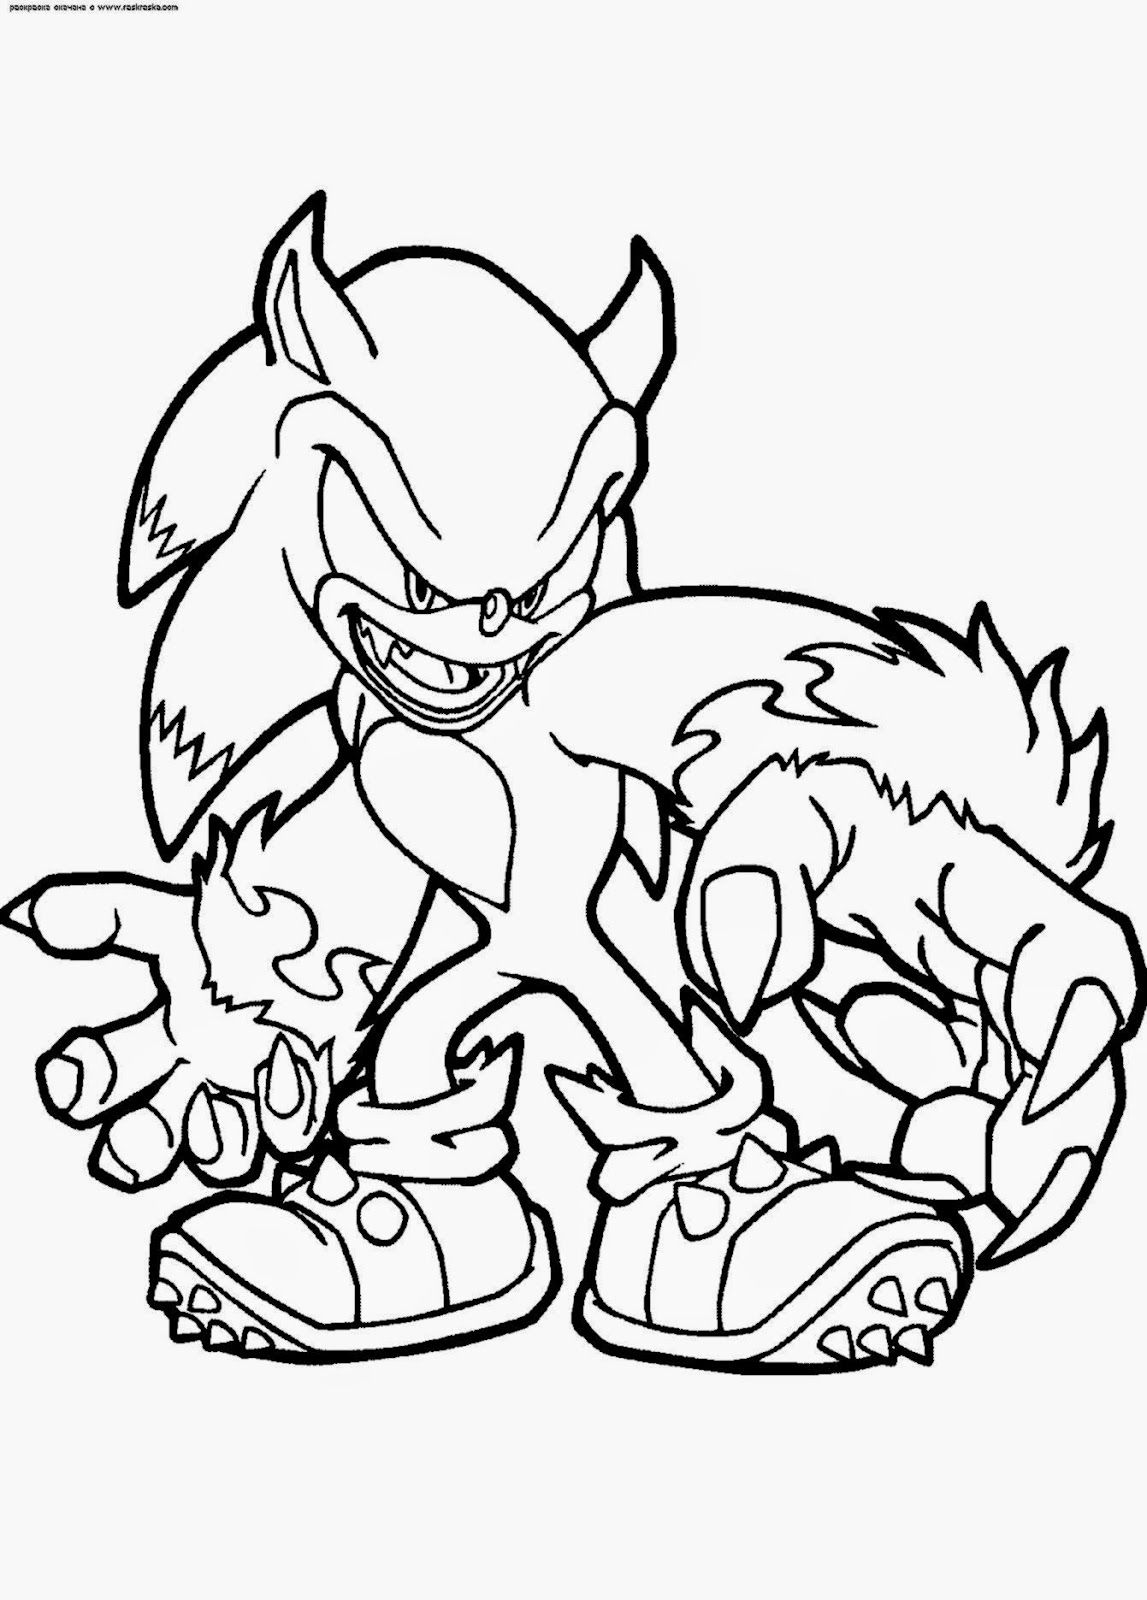 Shadow From Sonic Coloring Page - Coloring Home